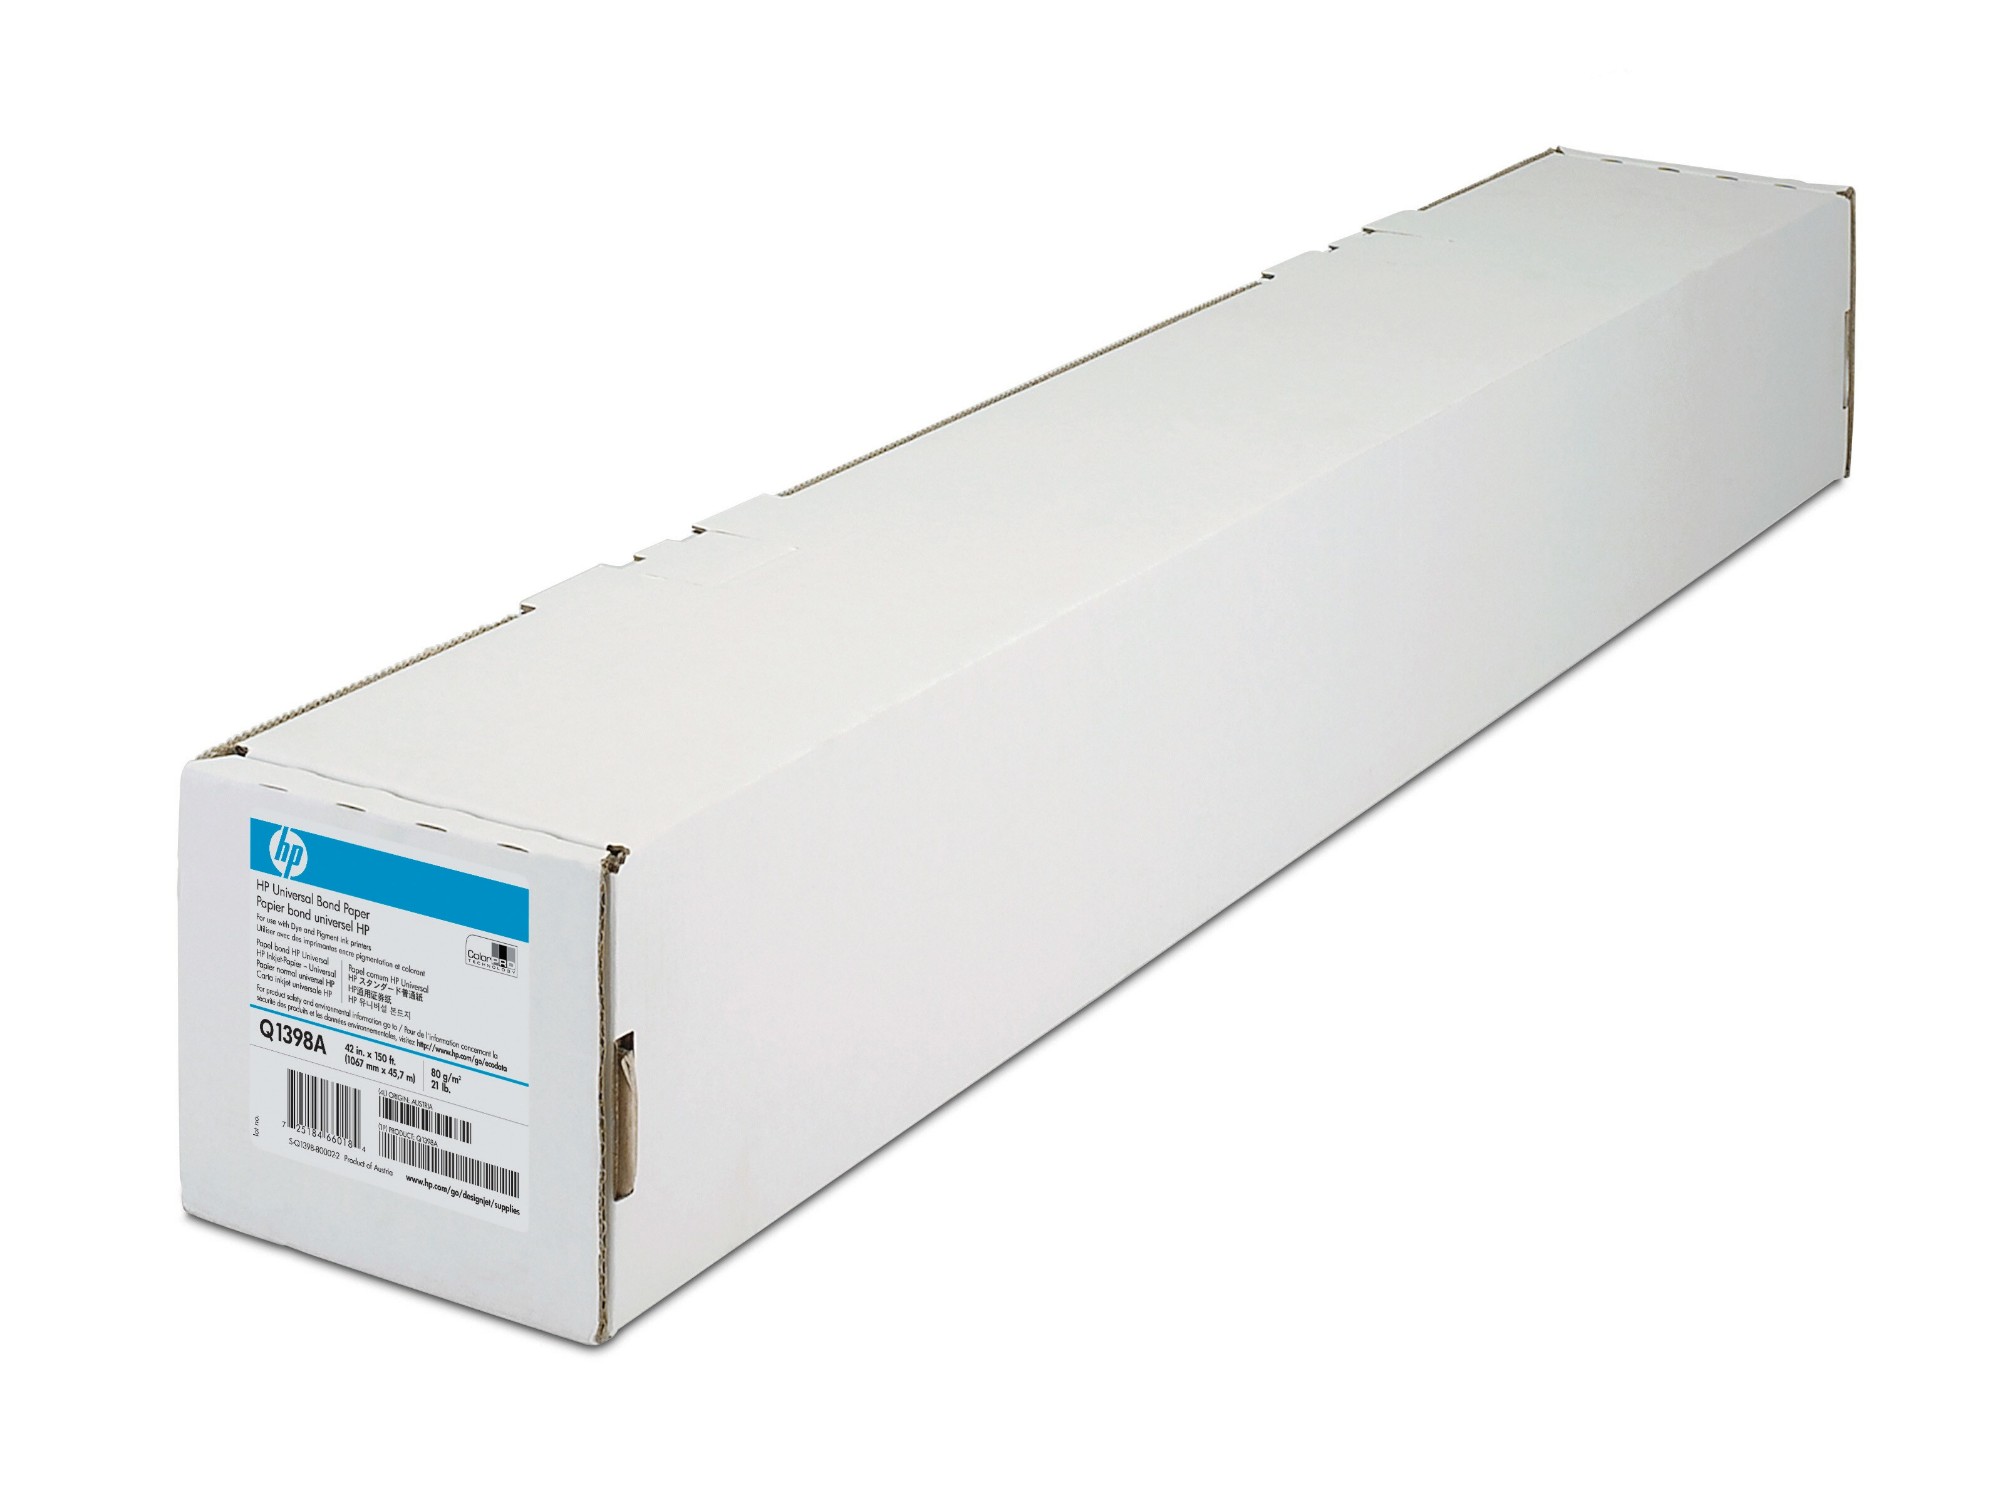 HP Universal Bond Paper-1067 mm x 45.7 m (42 in x 150 ft) printing paper Matte 1 sheets White